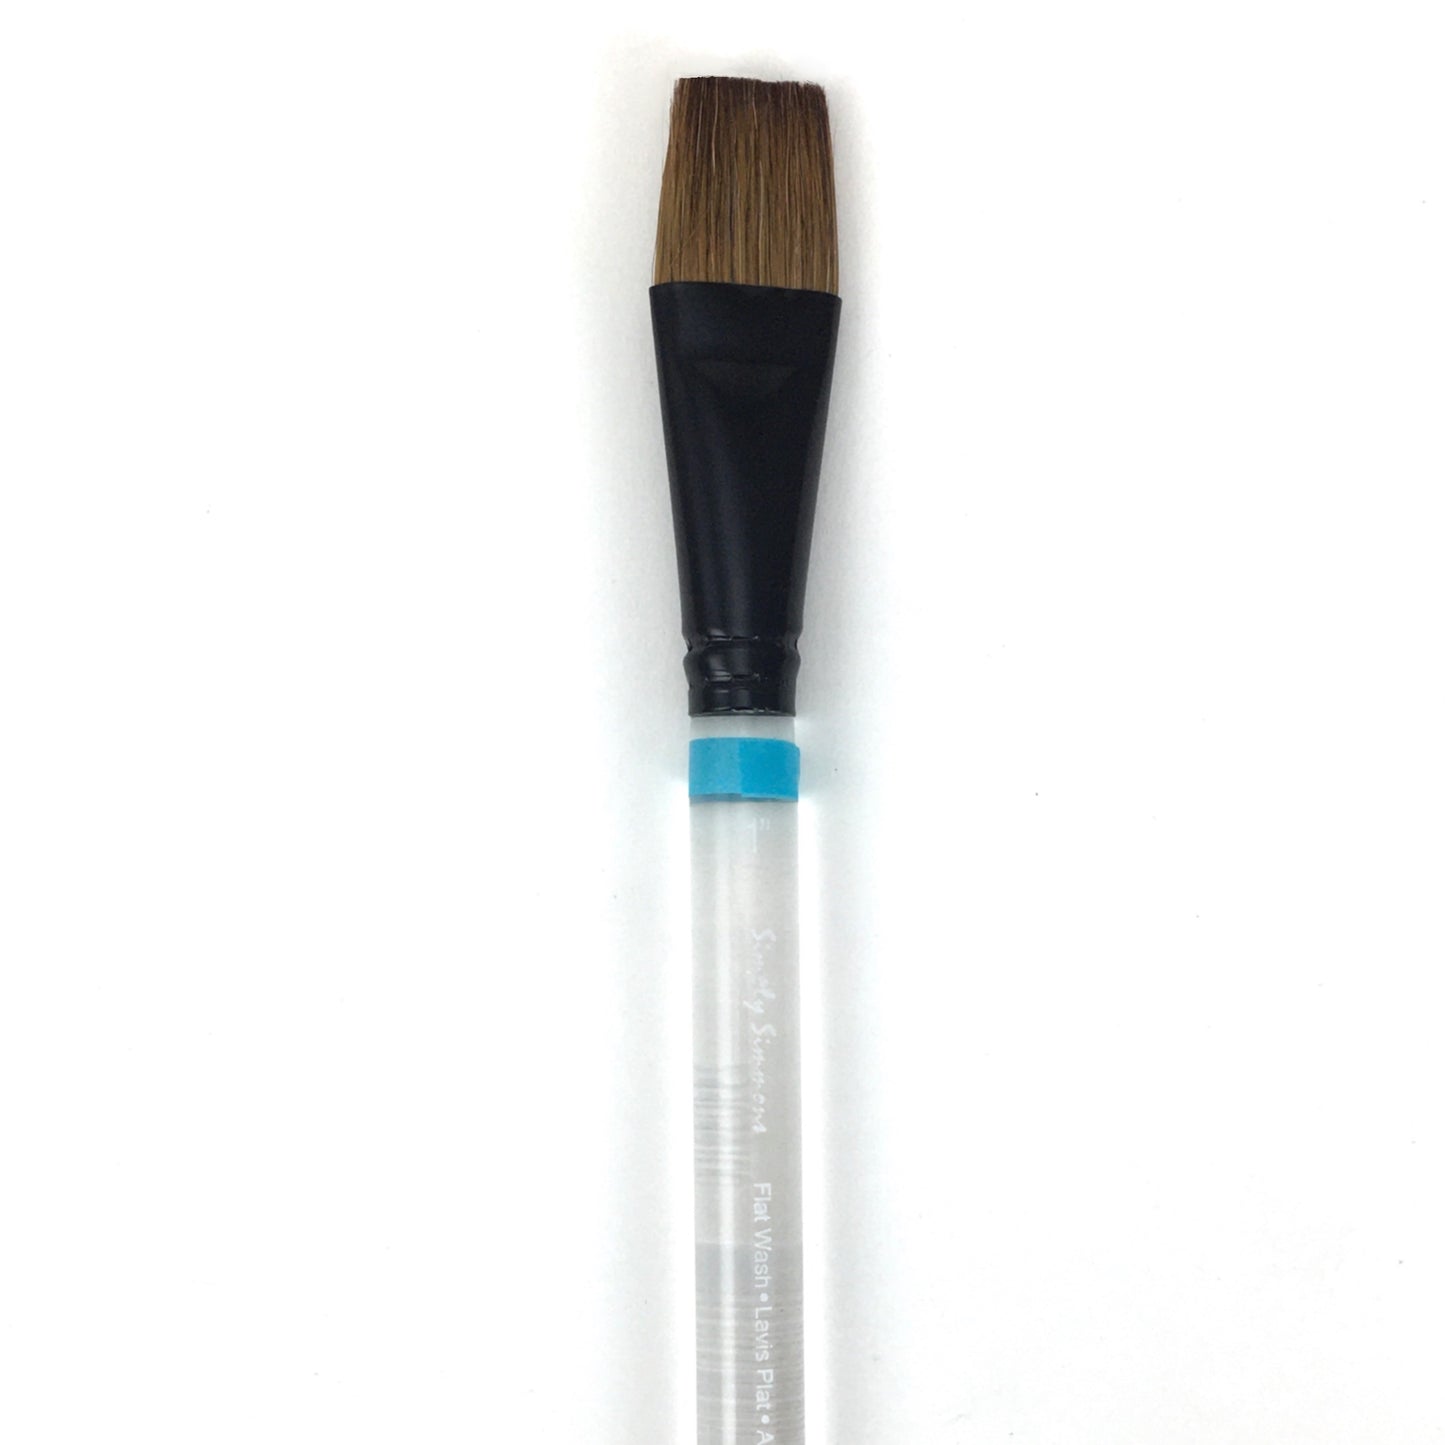 Simply Simmons Watercolor Brush - Short Handle - Flat Wash / - 1 inches / - natural by Robert Simmons - K. A. Artist Shop